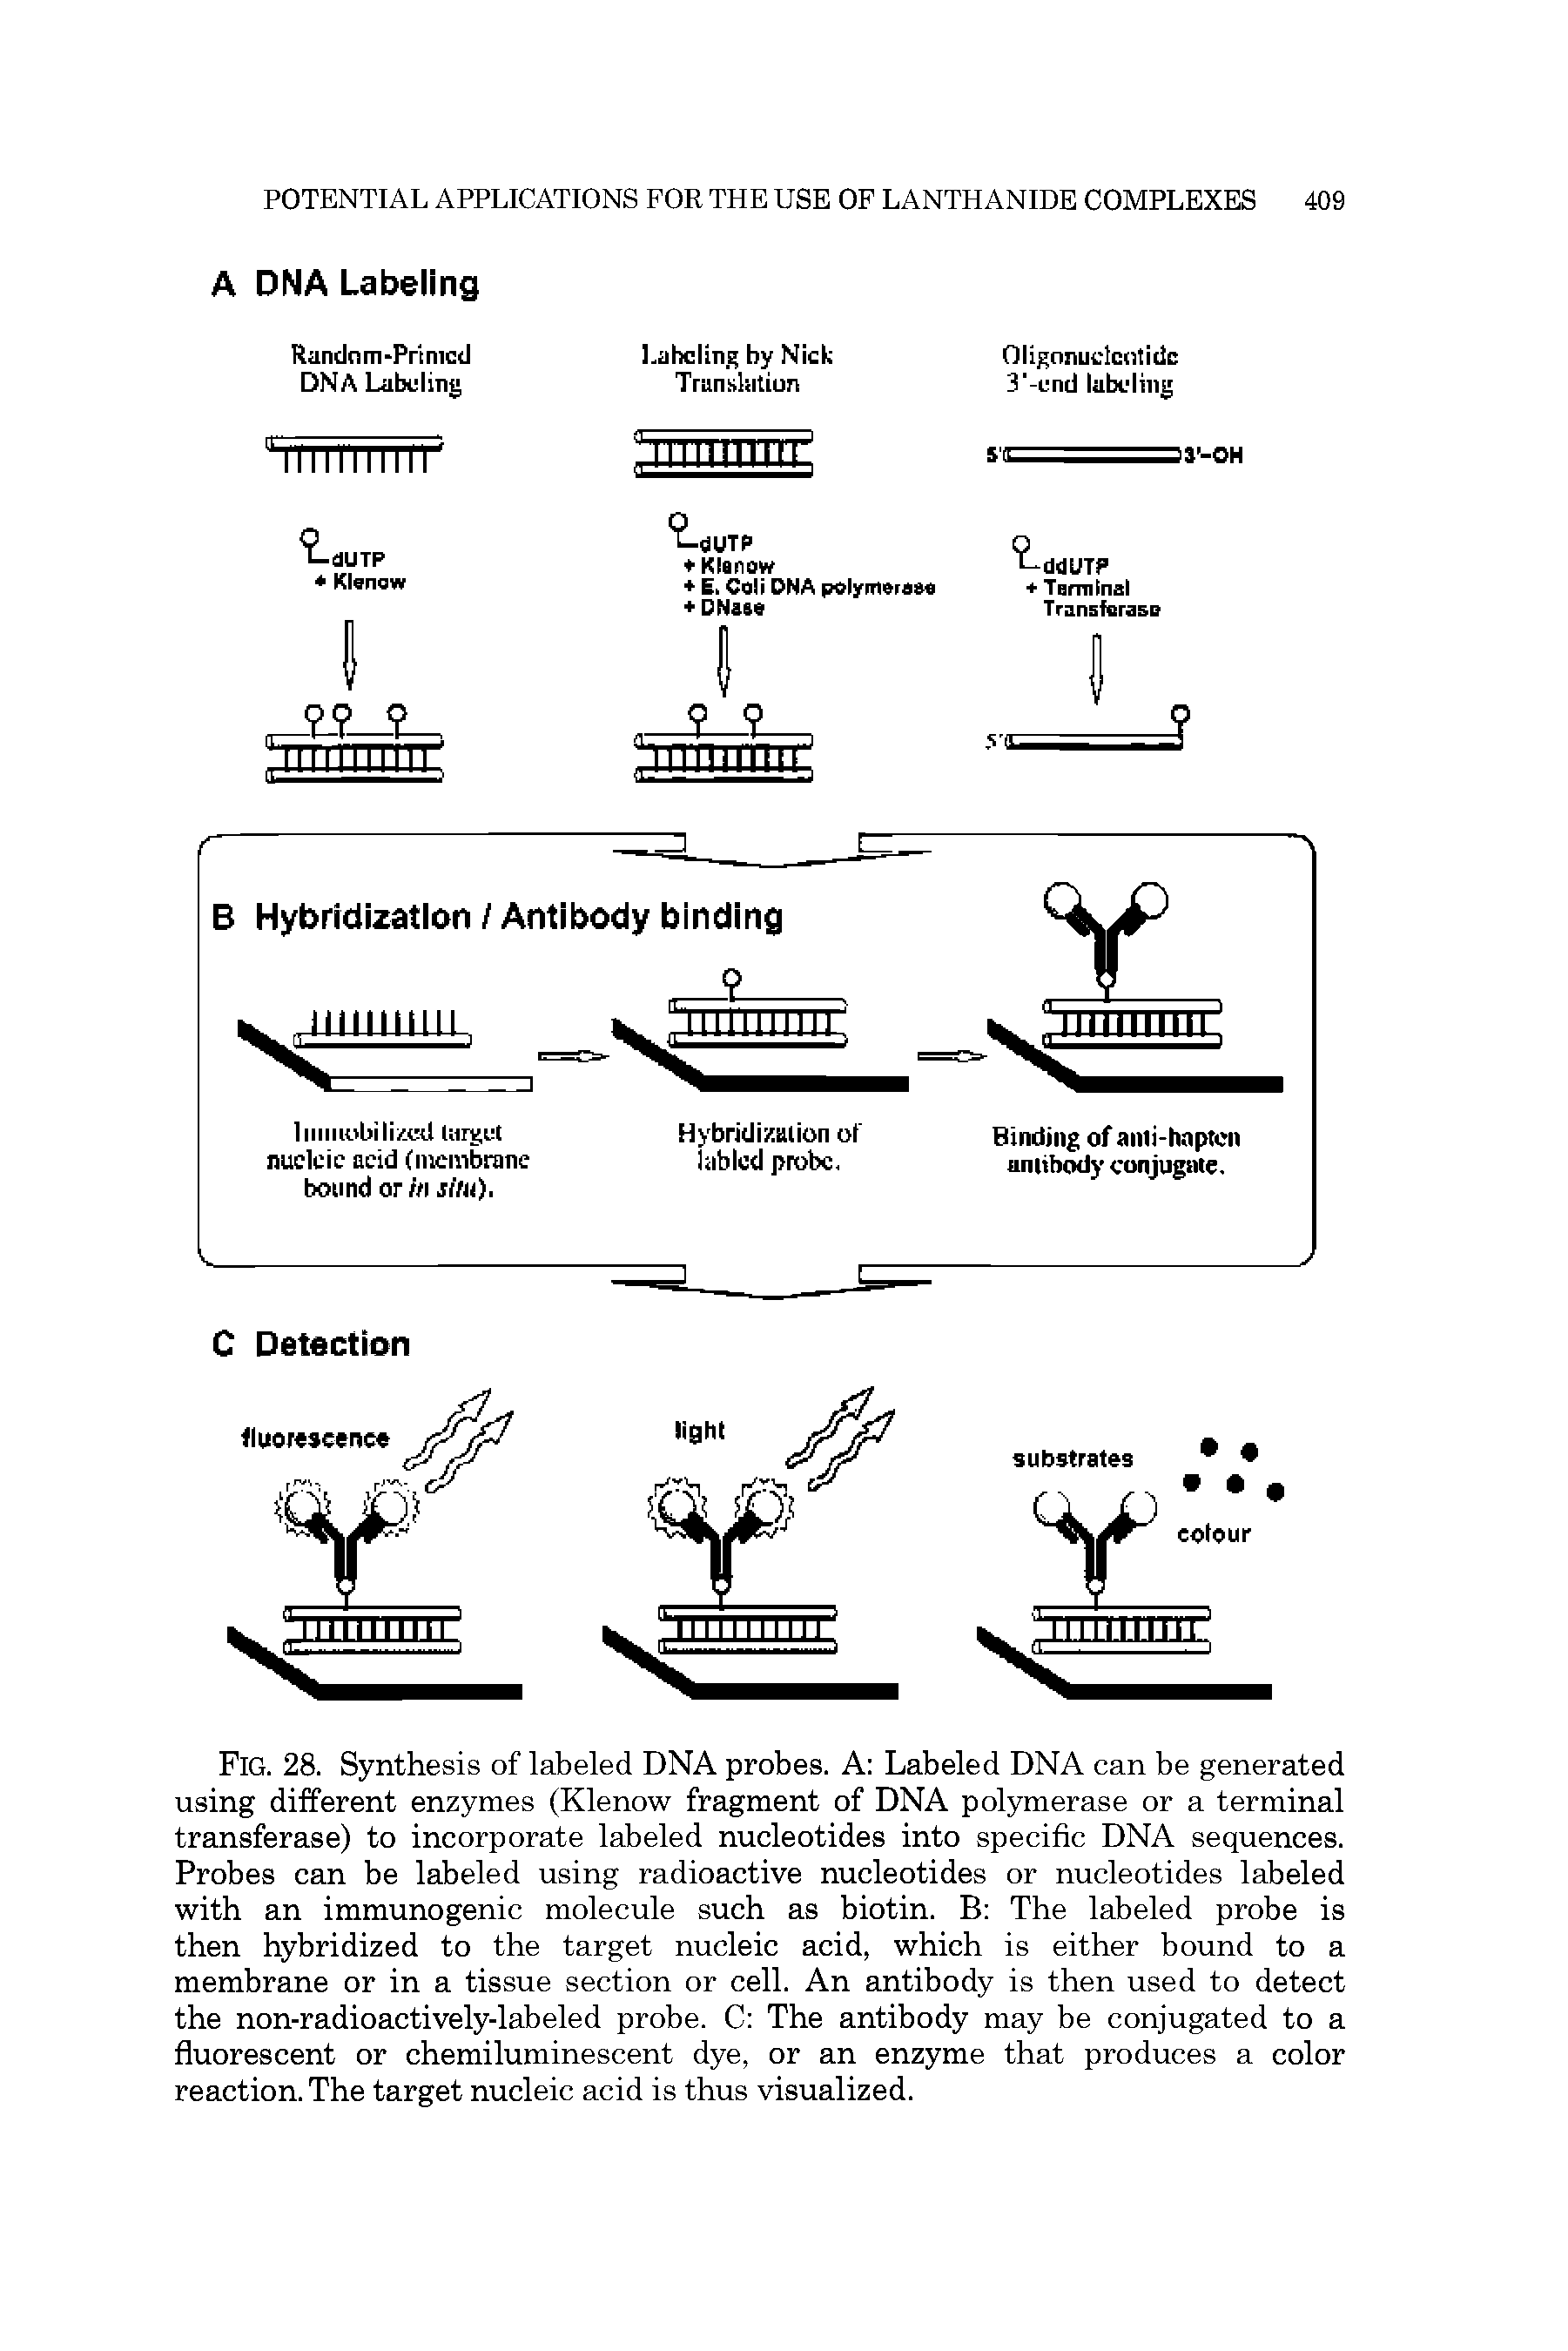 Fig. 28. Synthesis of labeled DNA probes. A Labeled DNA can be generated using different enzymes (Klenow fragment of DNA polymerase or a terminal transferase) to incorporate labeled nucleotides into specific DNA sequences. Probes can be labeled using radioactive nucleotides or nucleotides labeled with an immunogenic molecule such as biotin. B The labeled probe is then hybridized to the target nucleic acid, which is either bound to a membrane or in a tissue section or cell. An antibody is then used to detect the non-radioactively-labeled probe. C The antibody may be conjugated to a fluorescent or chemiluminescent dye, or an enzyme that produces a color reaction. The target nucleic acid is thus visualized.